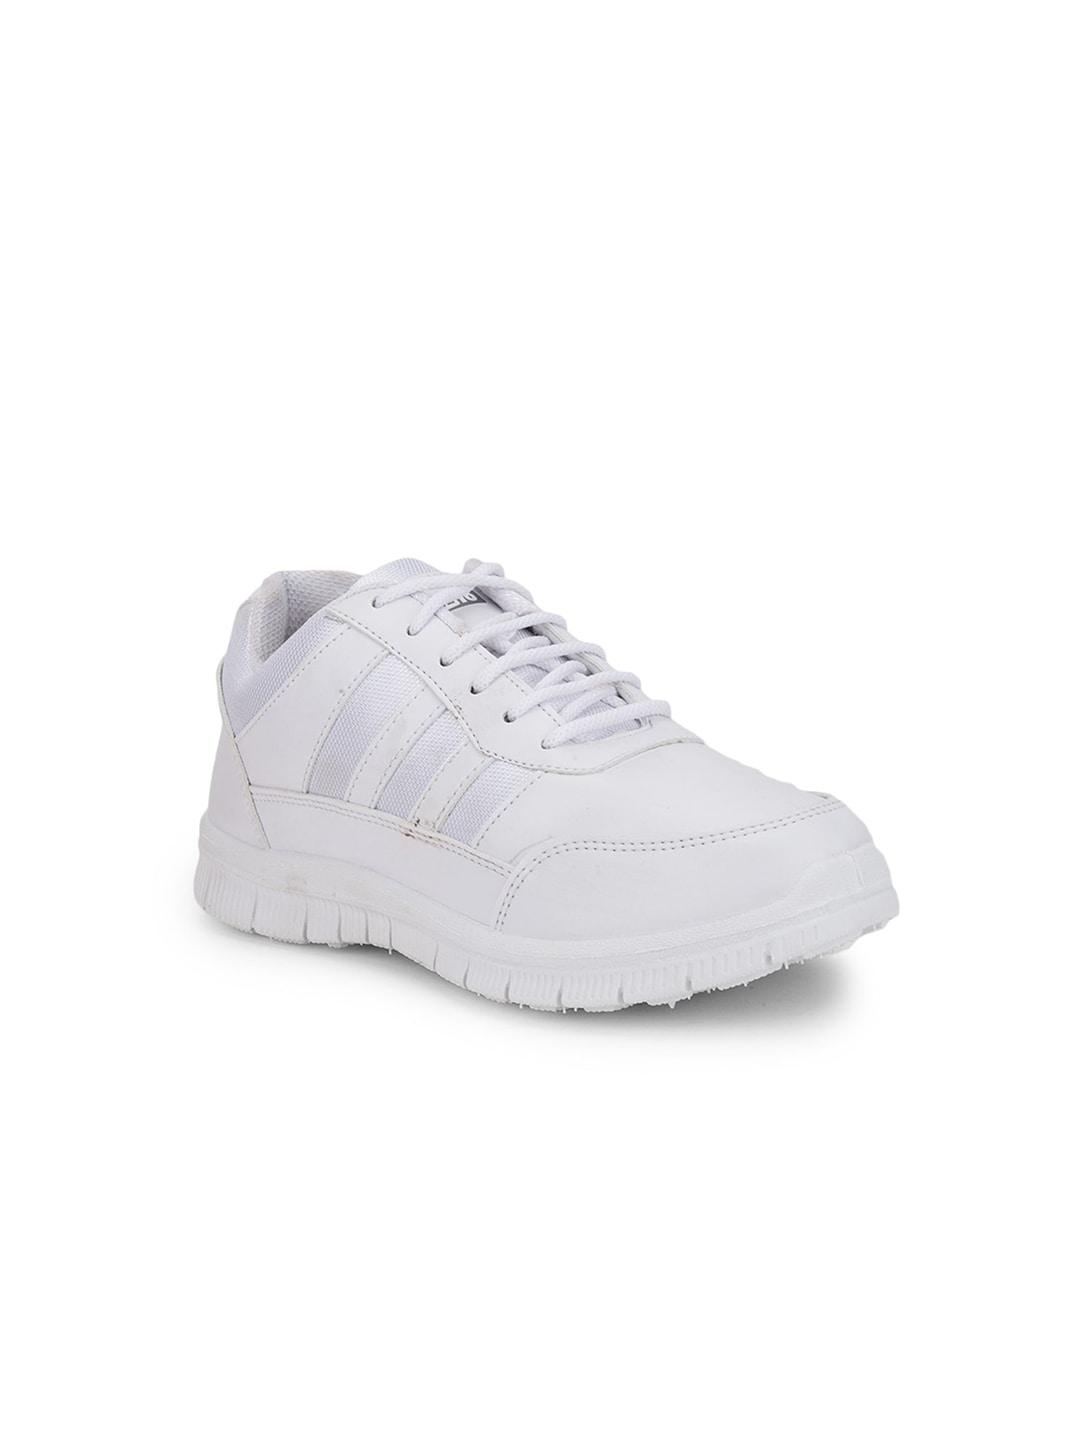 Liberty Boys White Synthetic Lace-Ups Sneakers